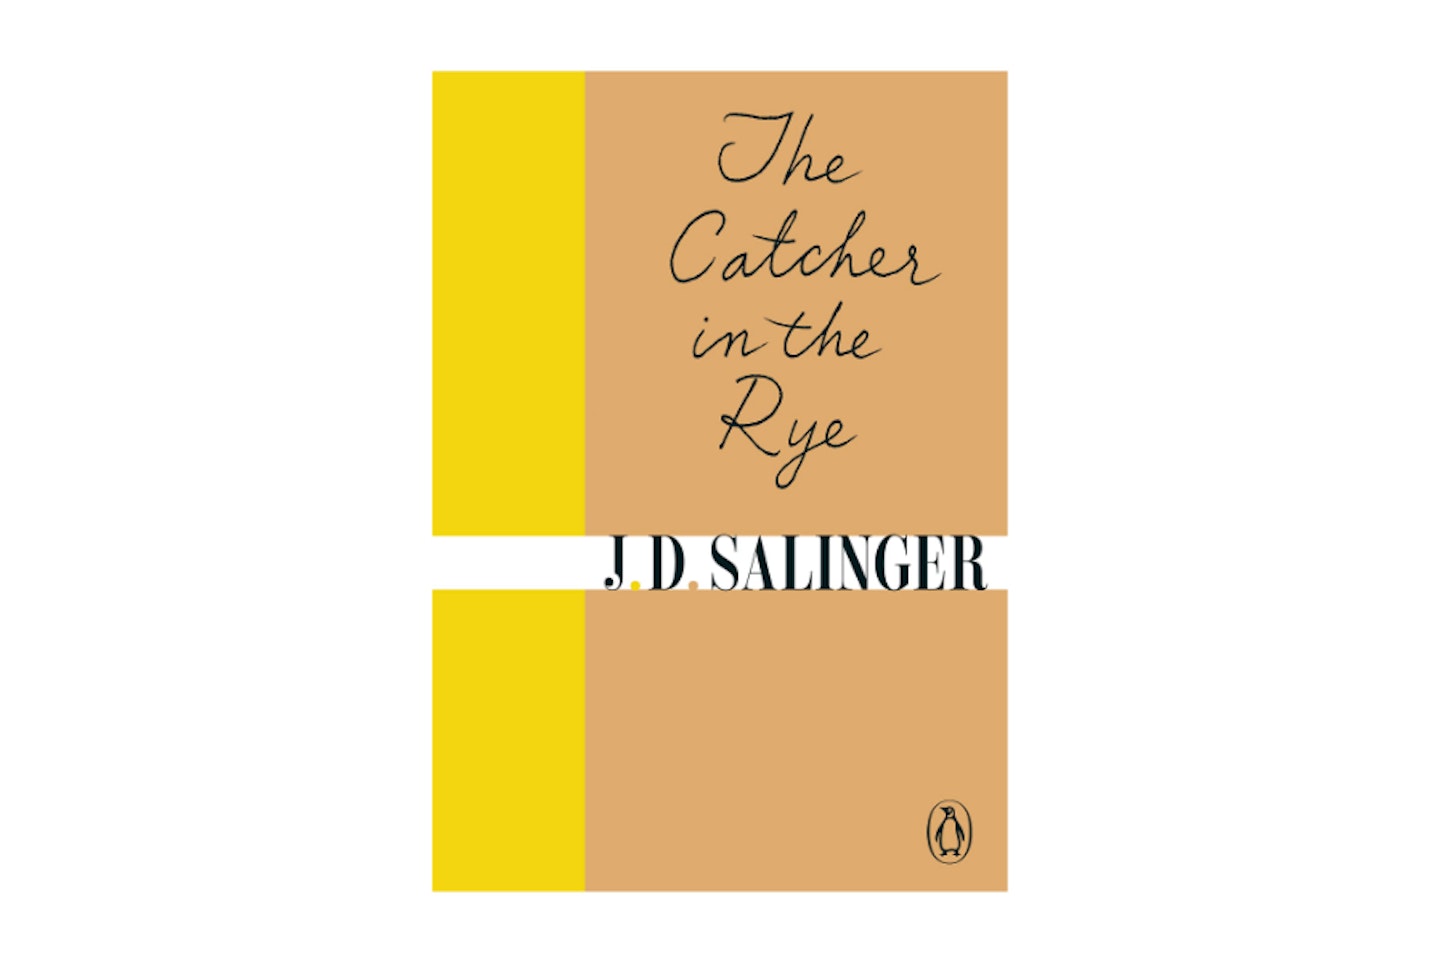 Catcher In The Rye by J.D. Salinger